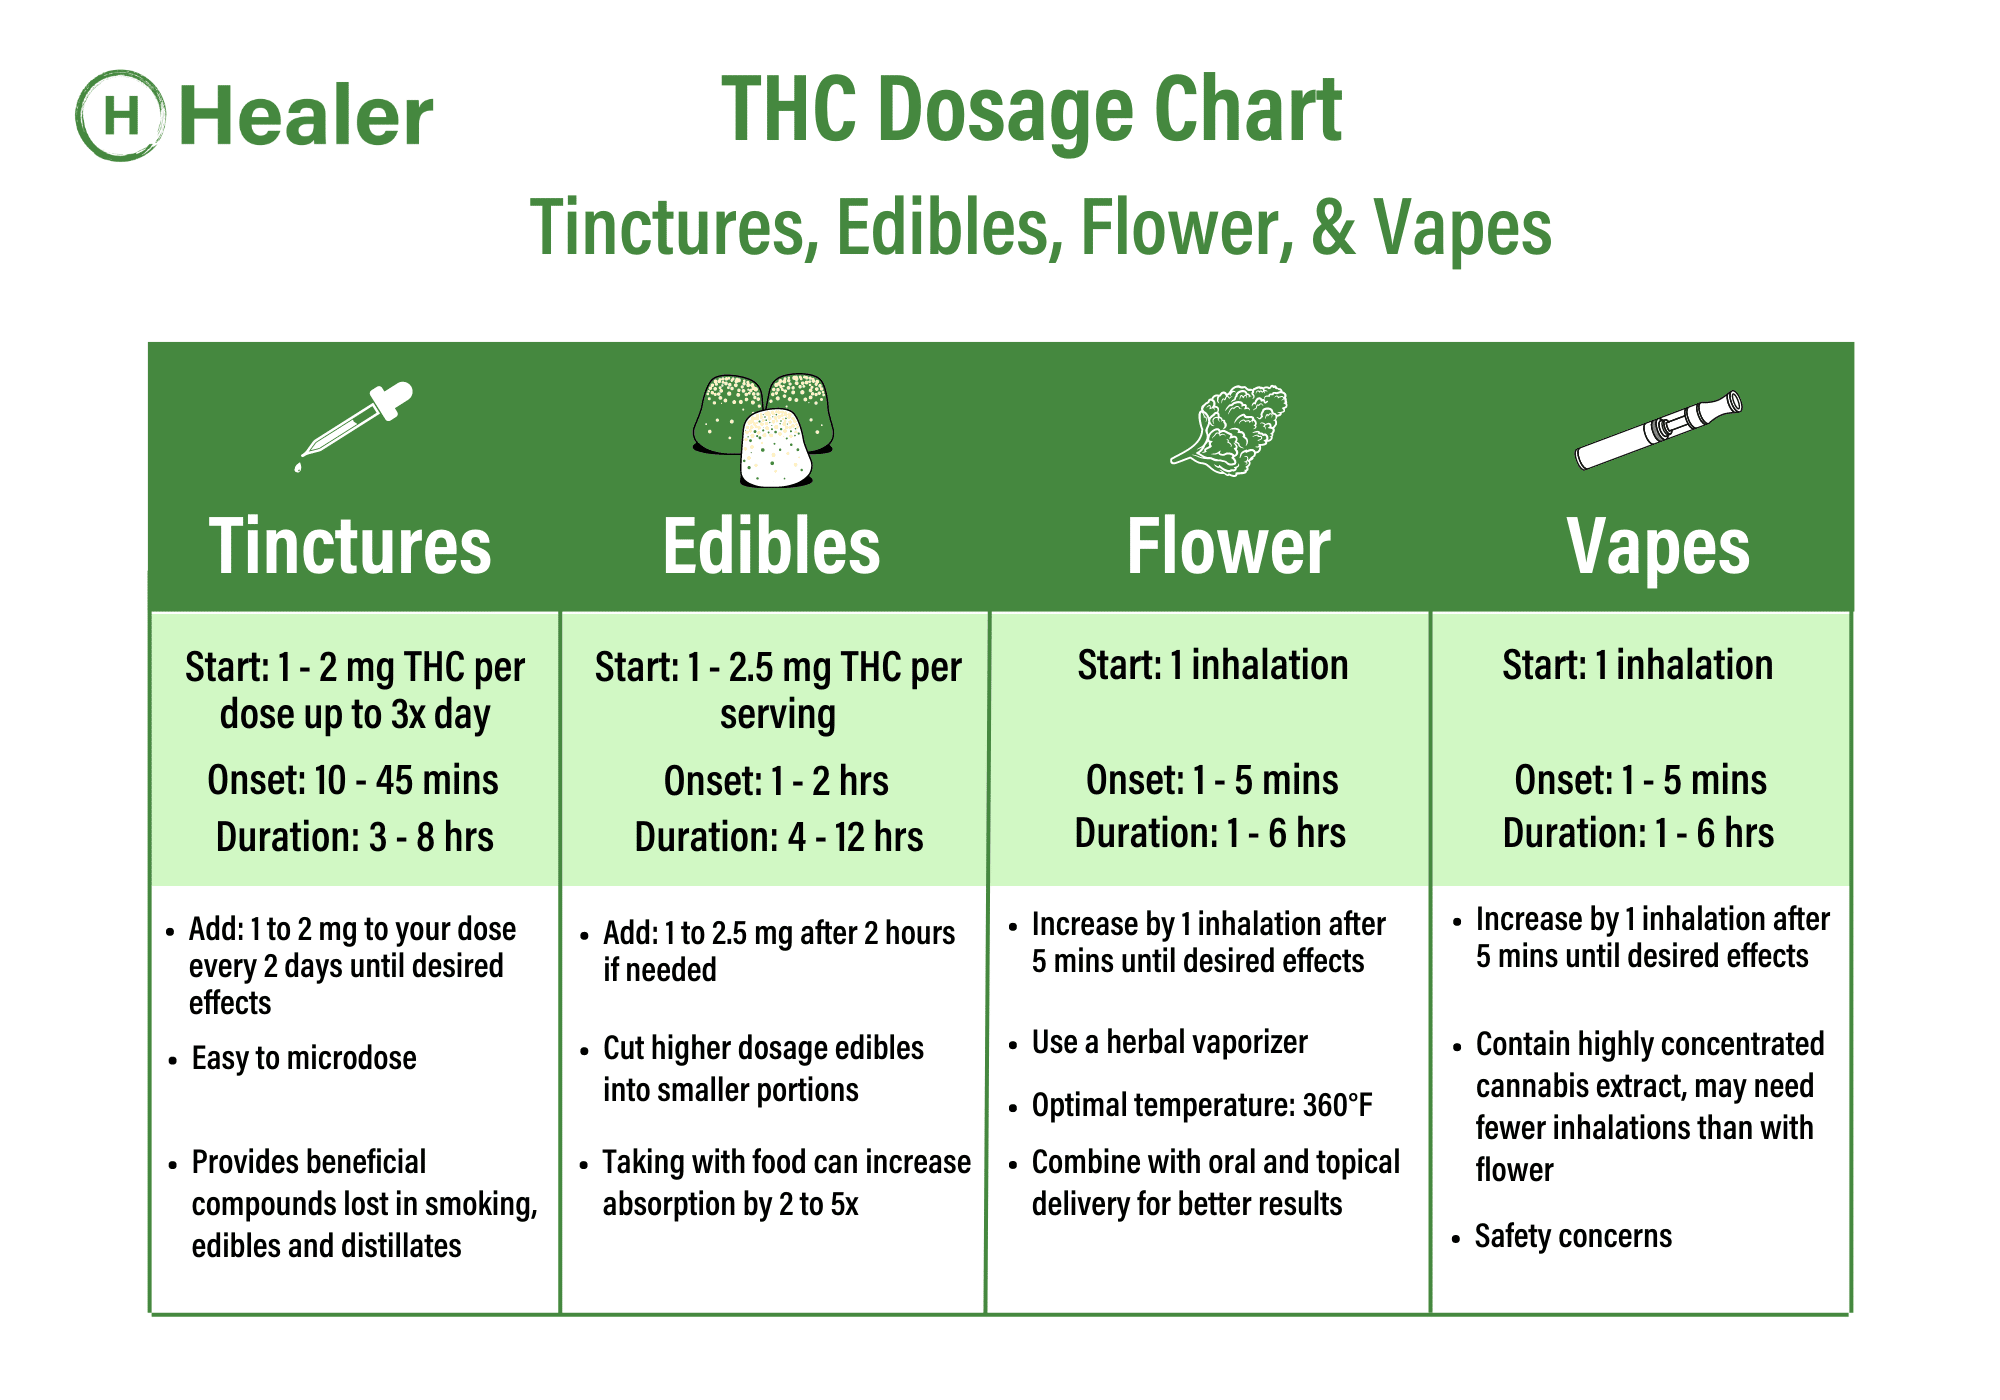 THC Dosage Chart created by Healer